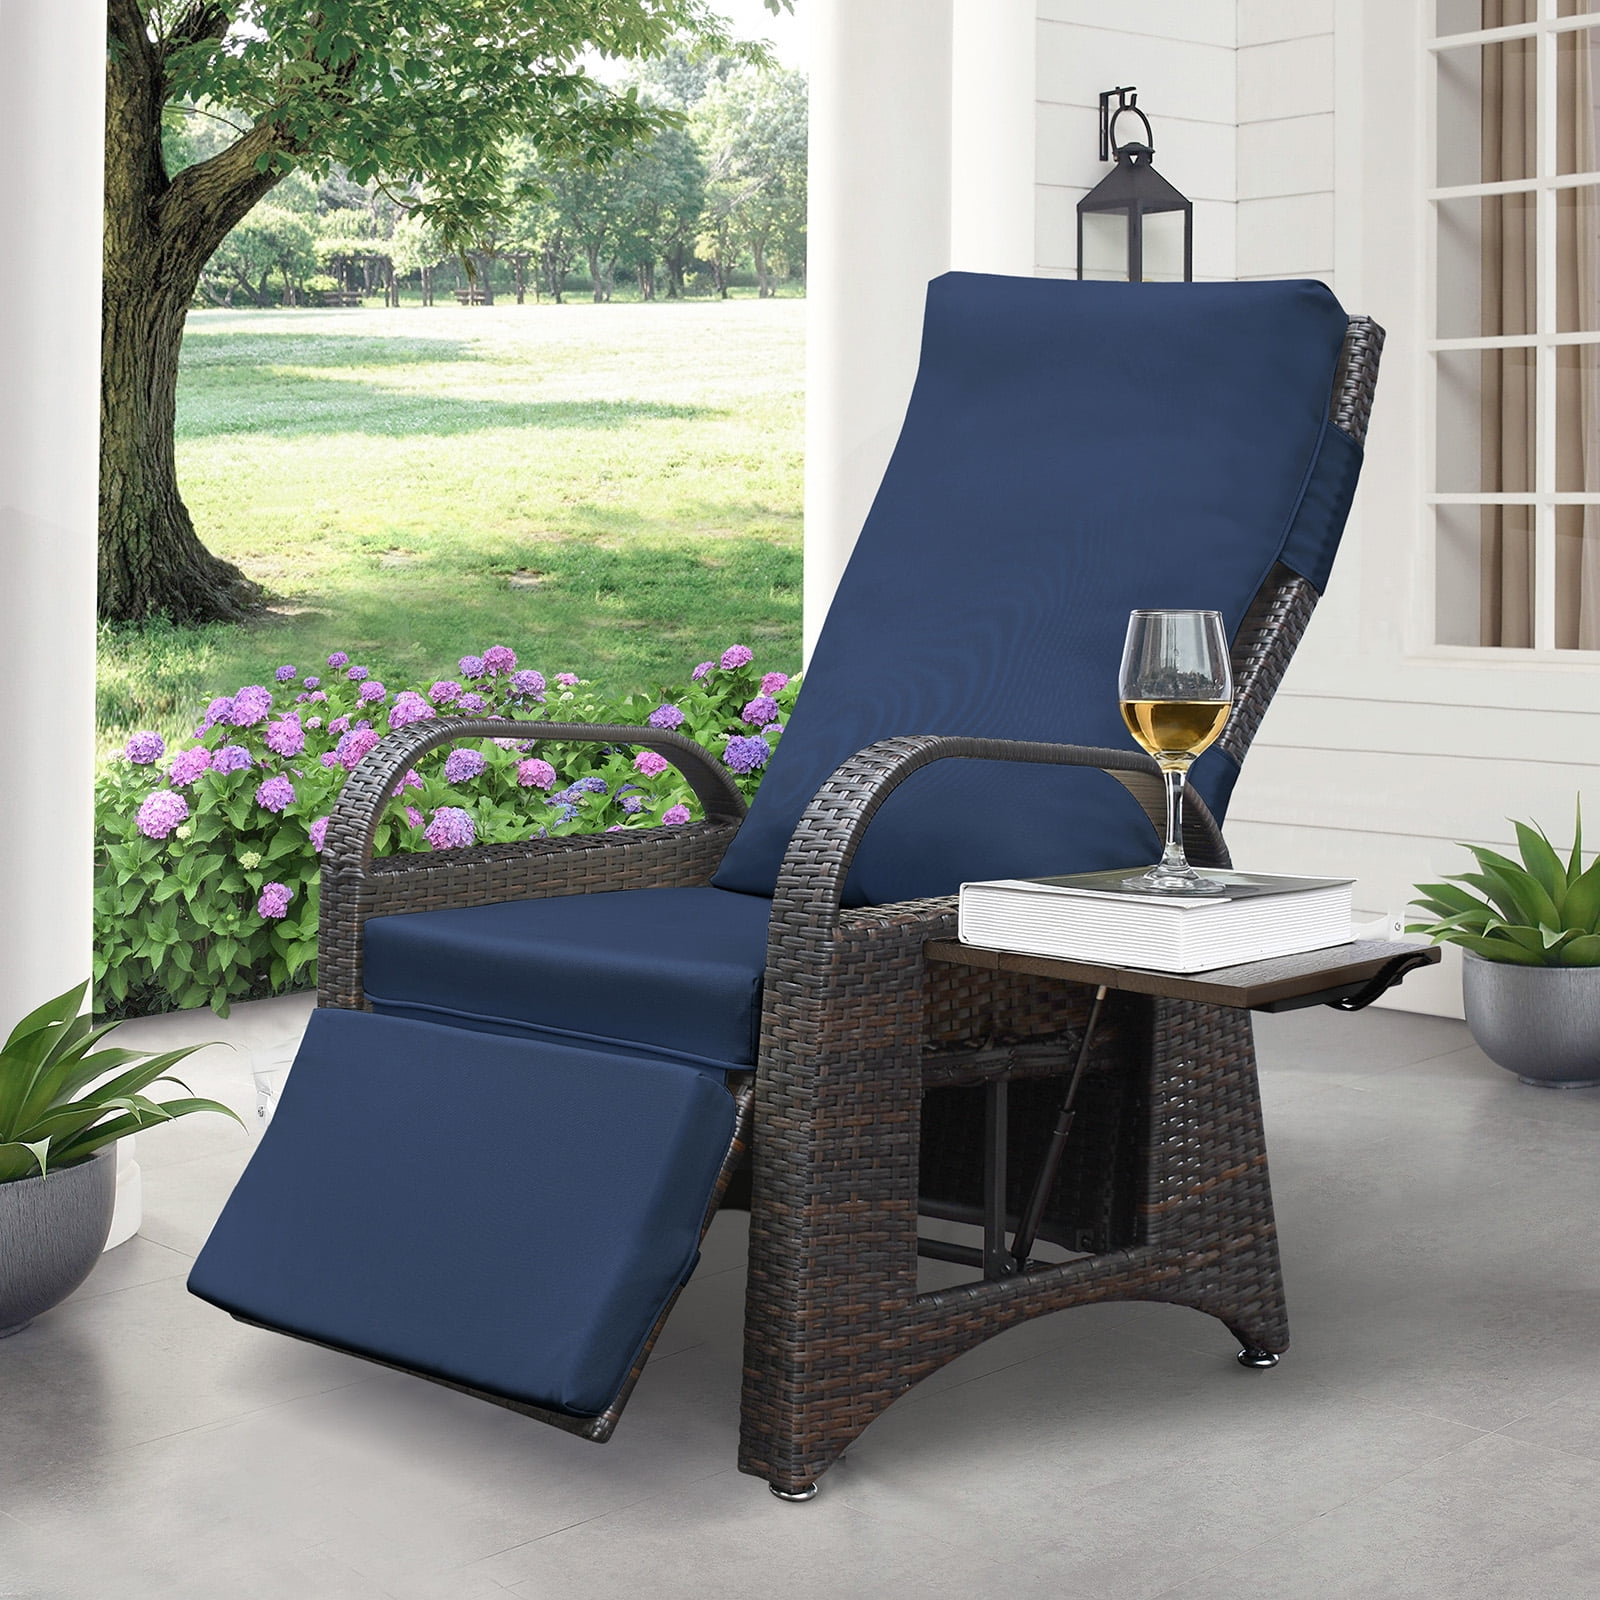 Outdoor Comfort: Choosing the Perfect Patio Recliner Chair插图4